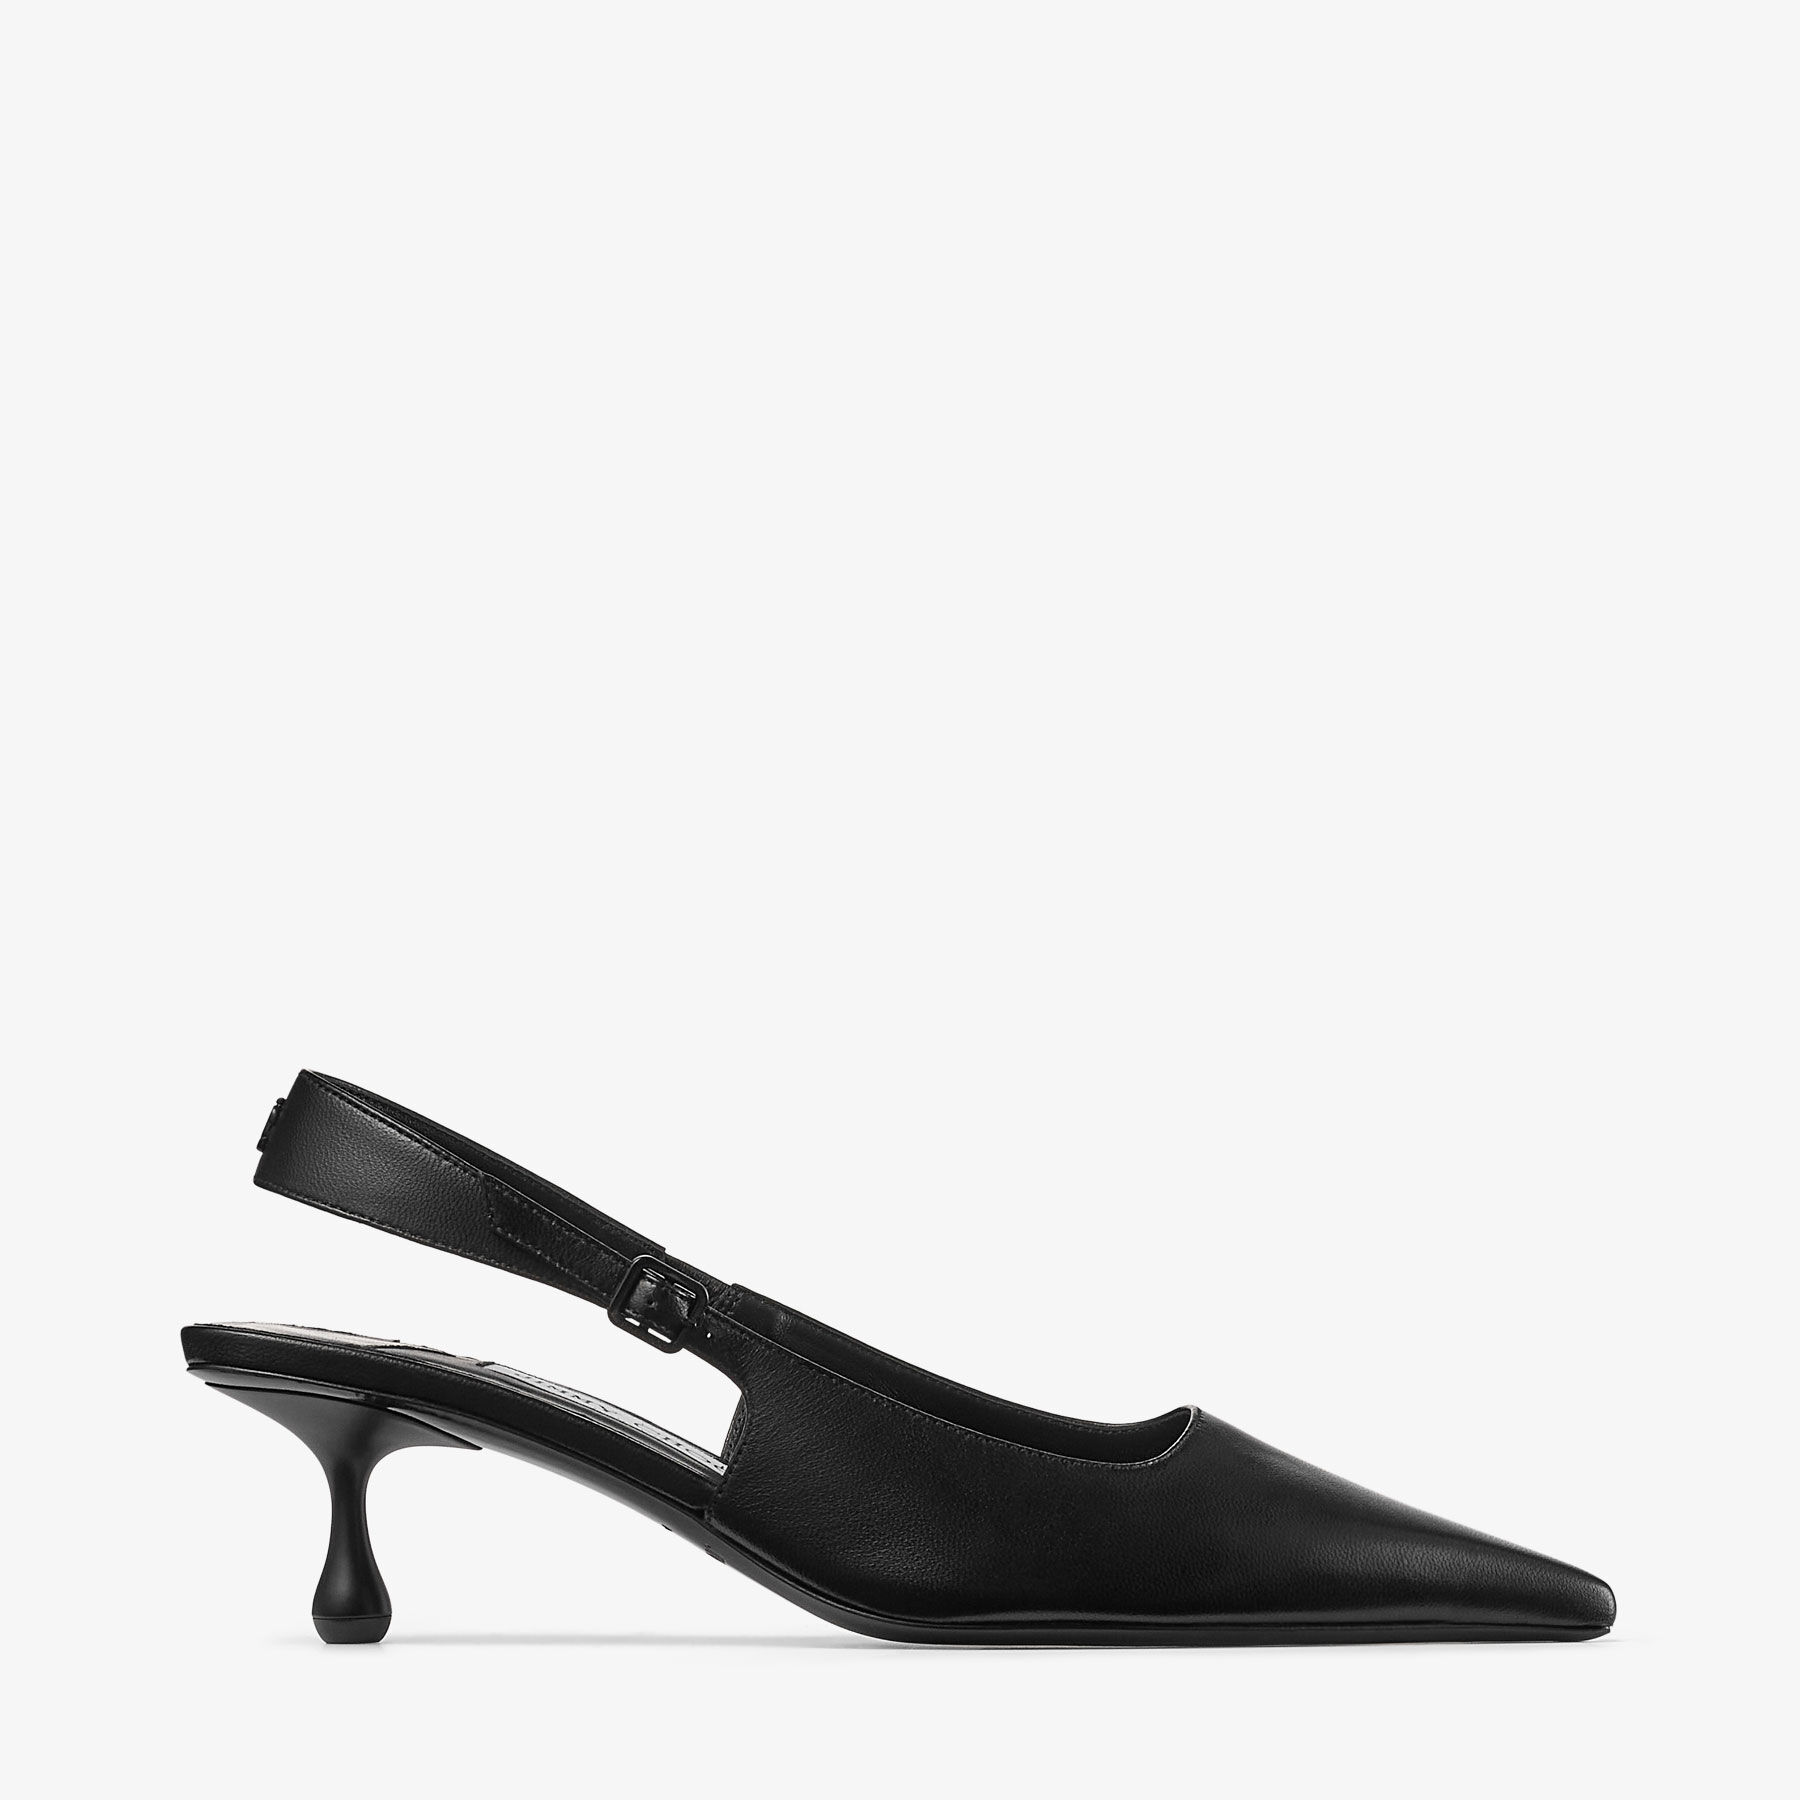 Amel 50 | Black Nappa Leather Sling Back Pumps | New Collection | JIMMY ...